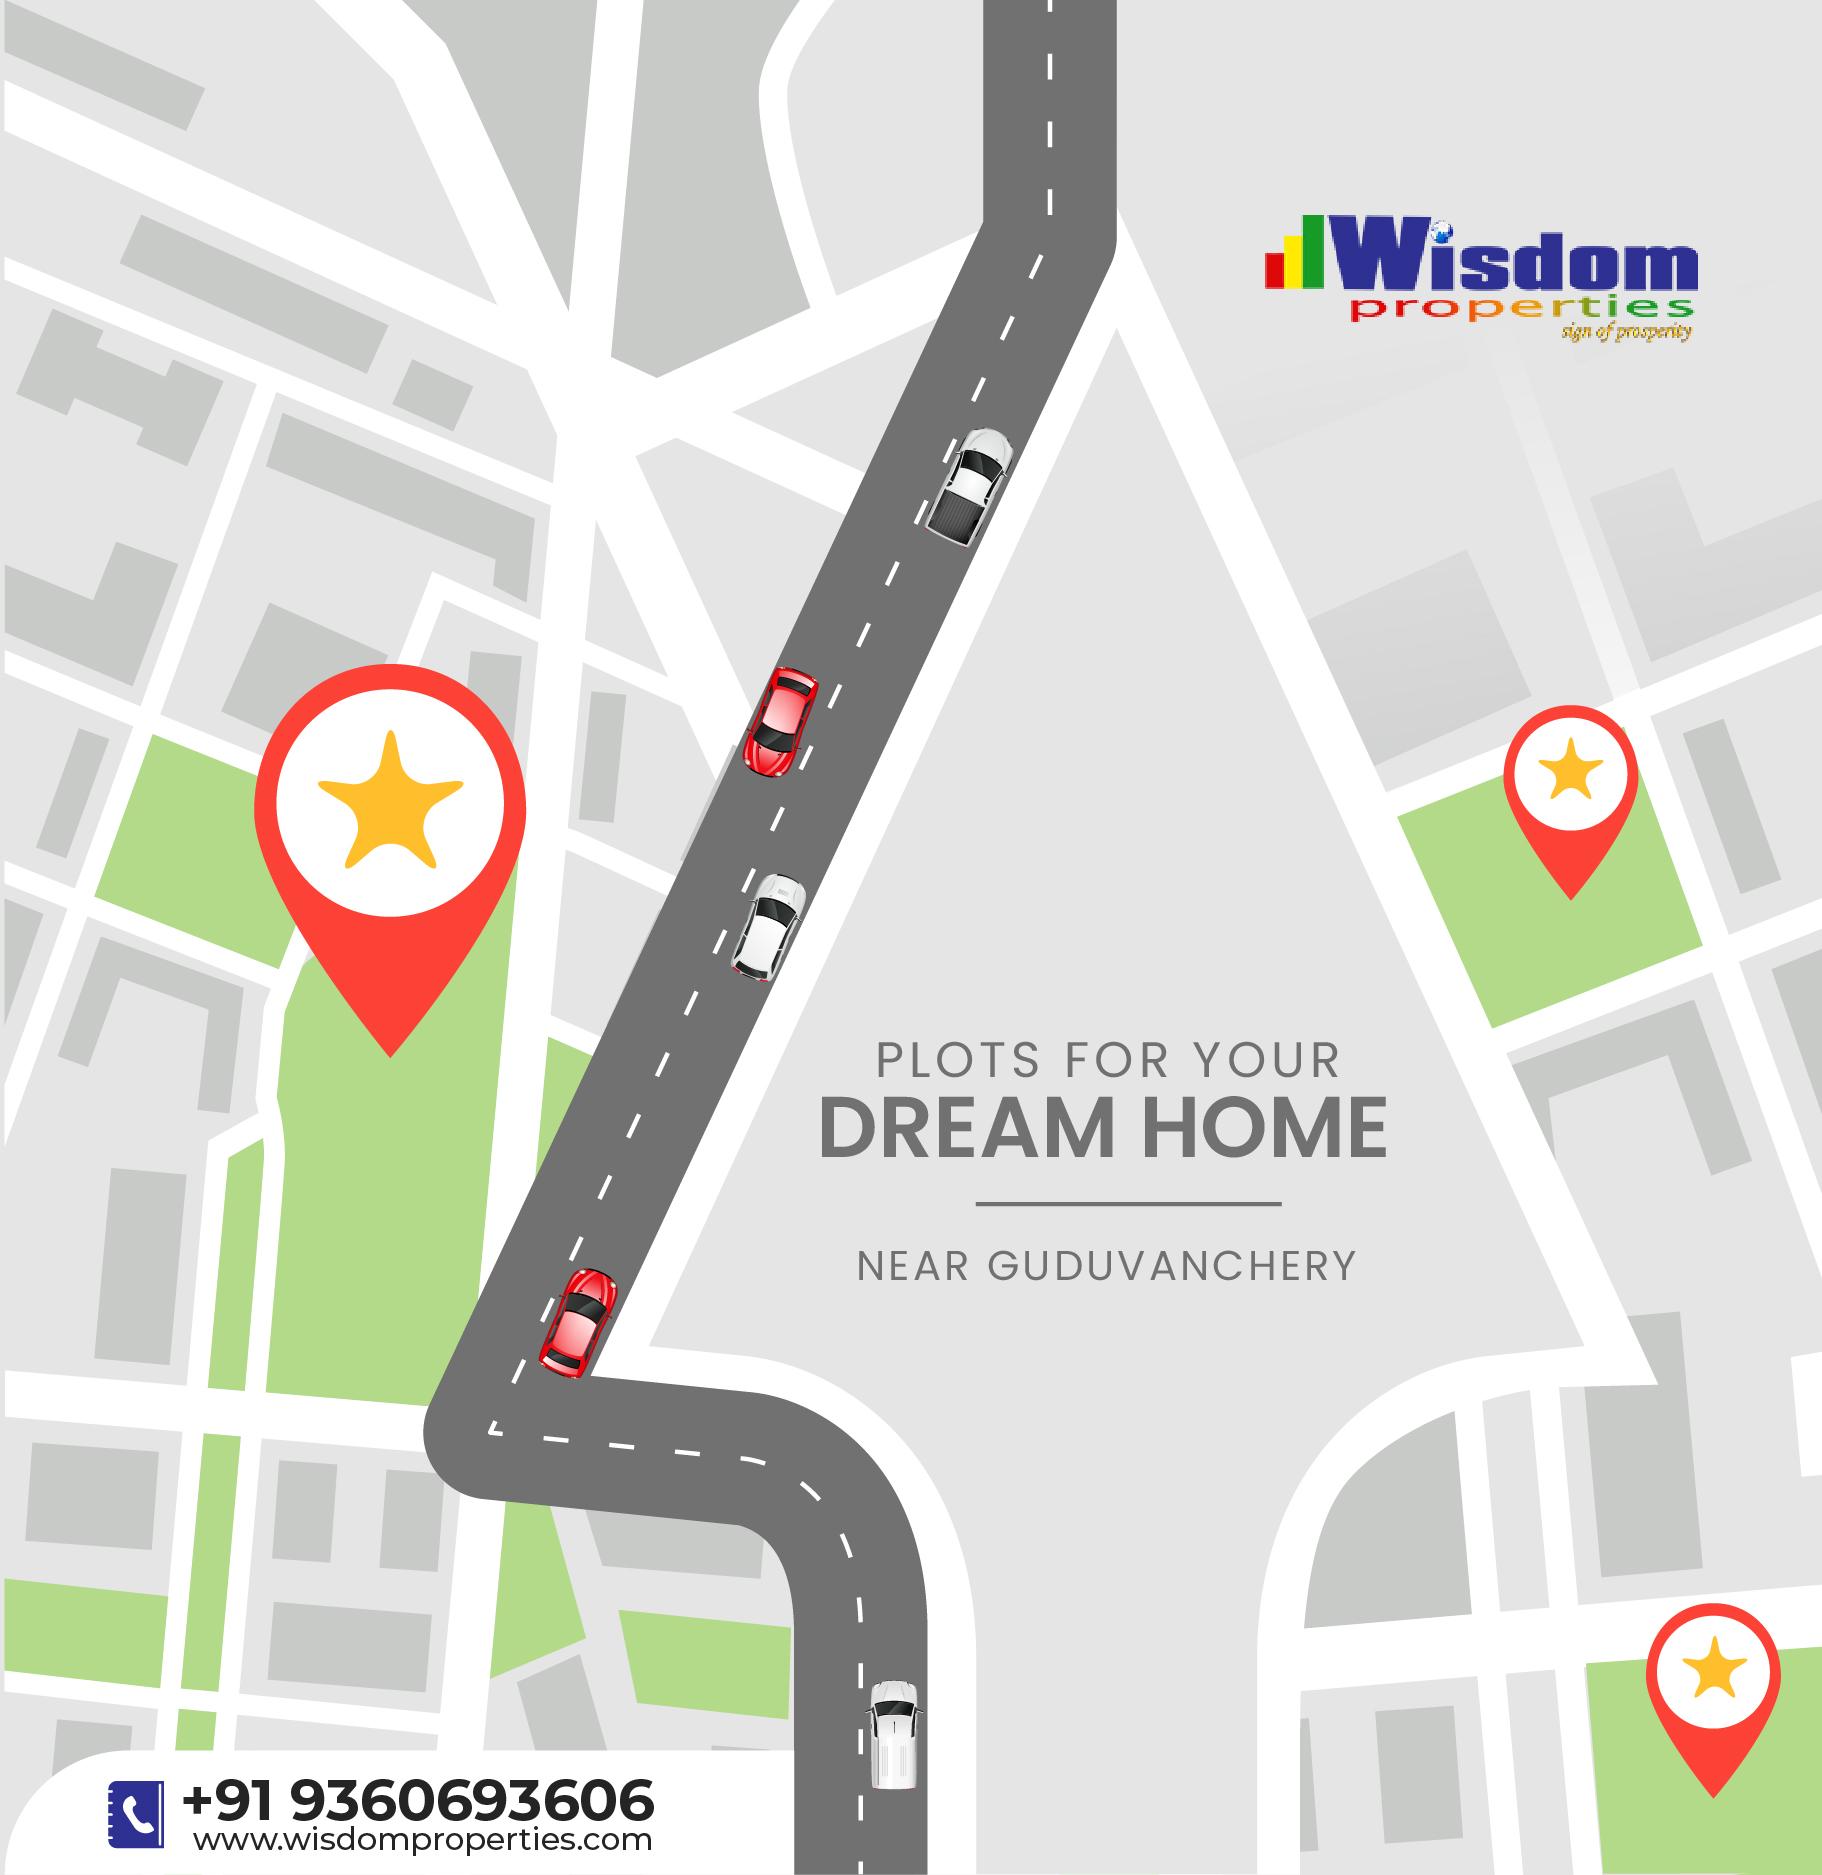 WisdomProperties are a very professional agency with good selection of places.